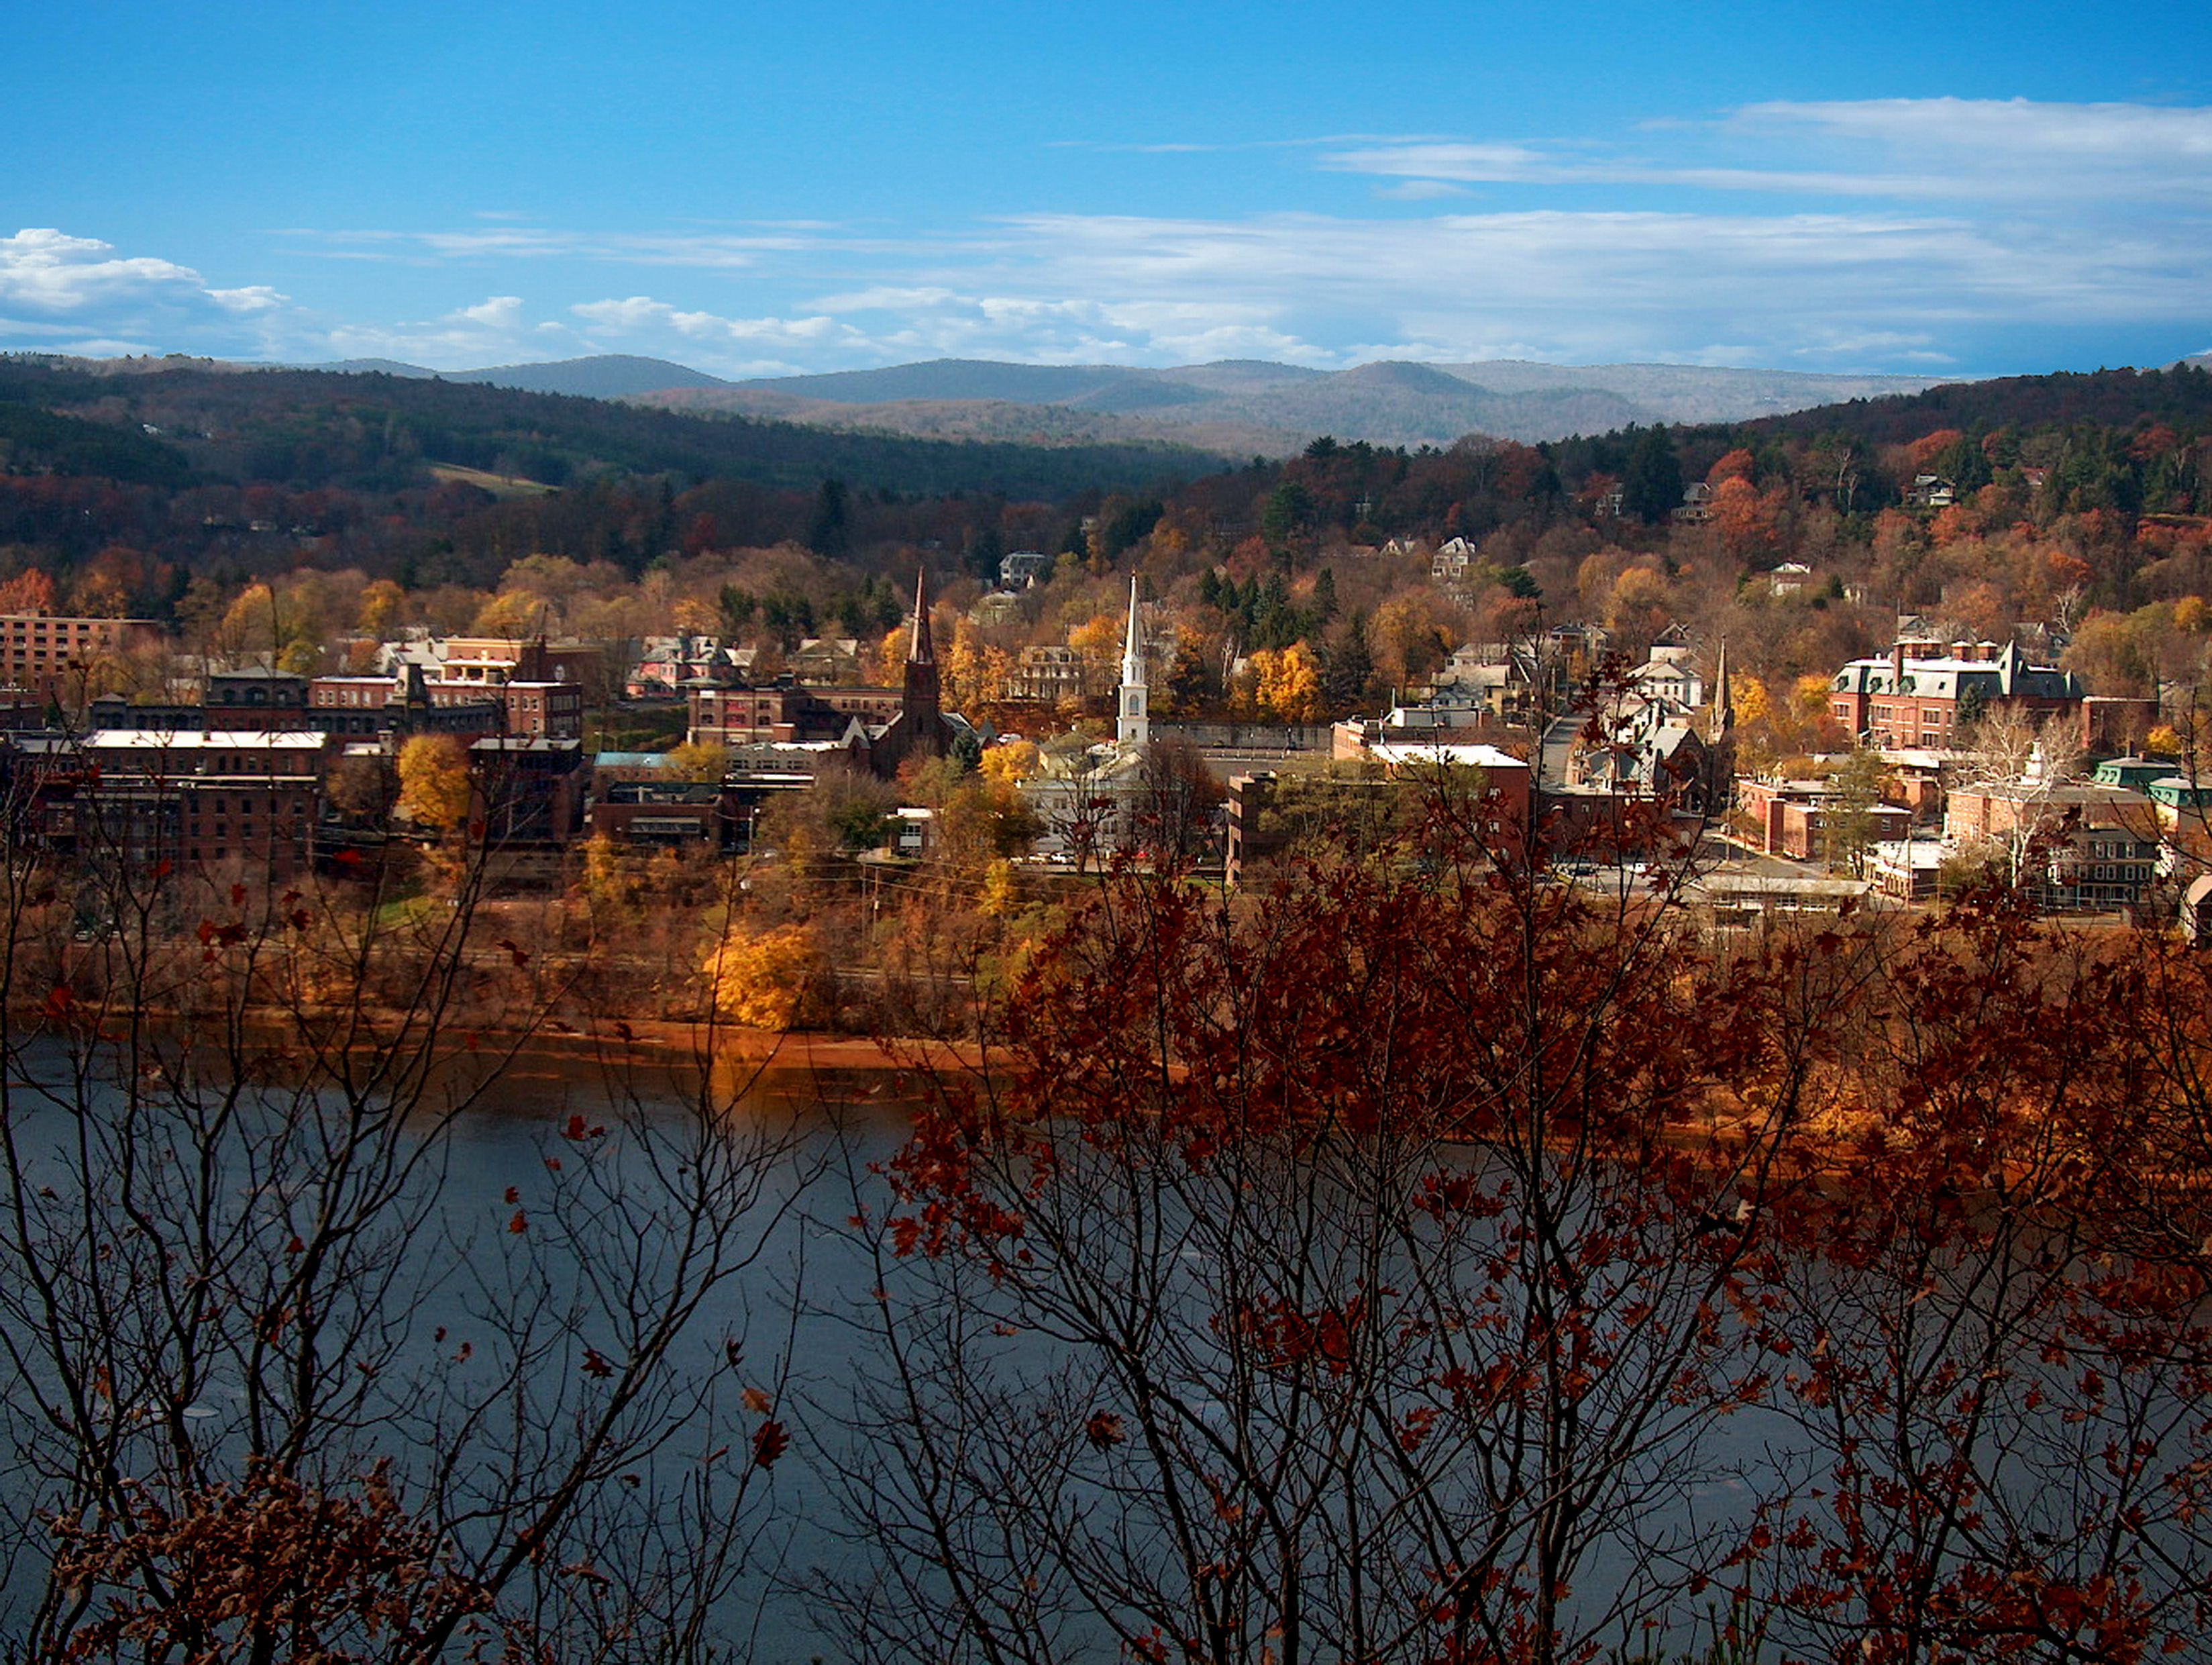 Scenic view of a town with buildings amid autumn trees and distant hills